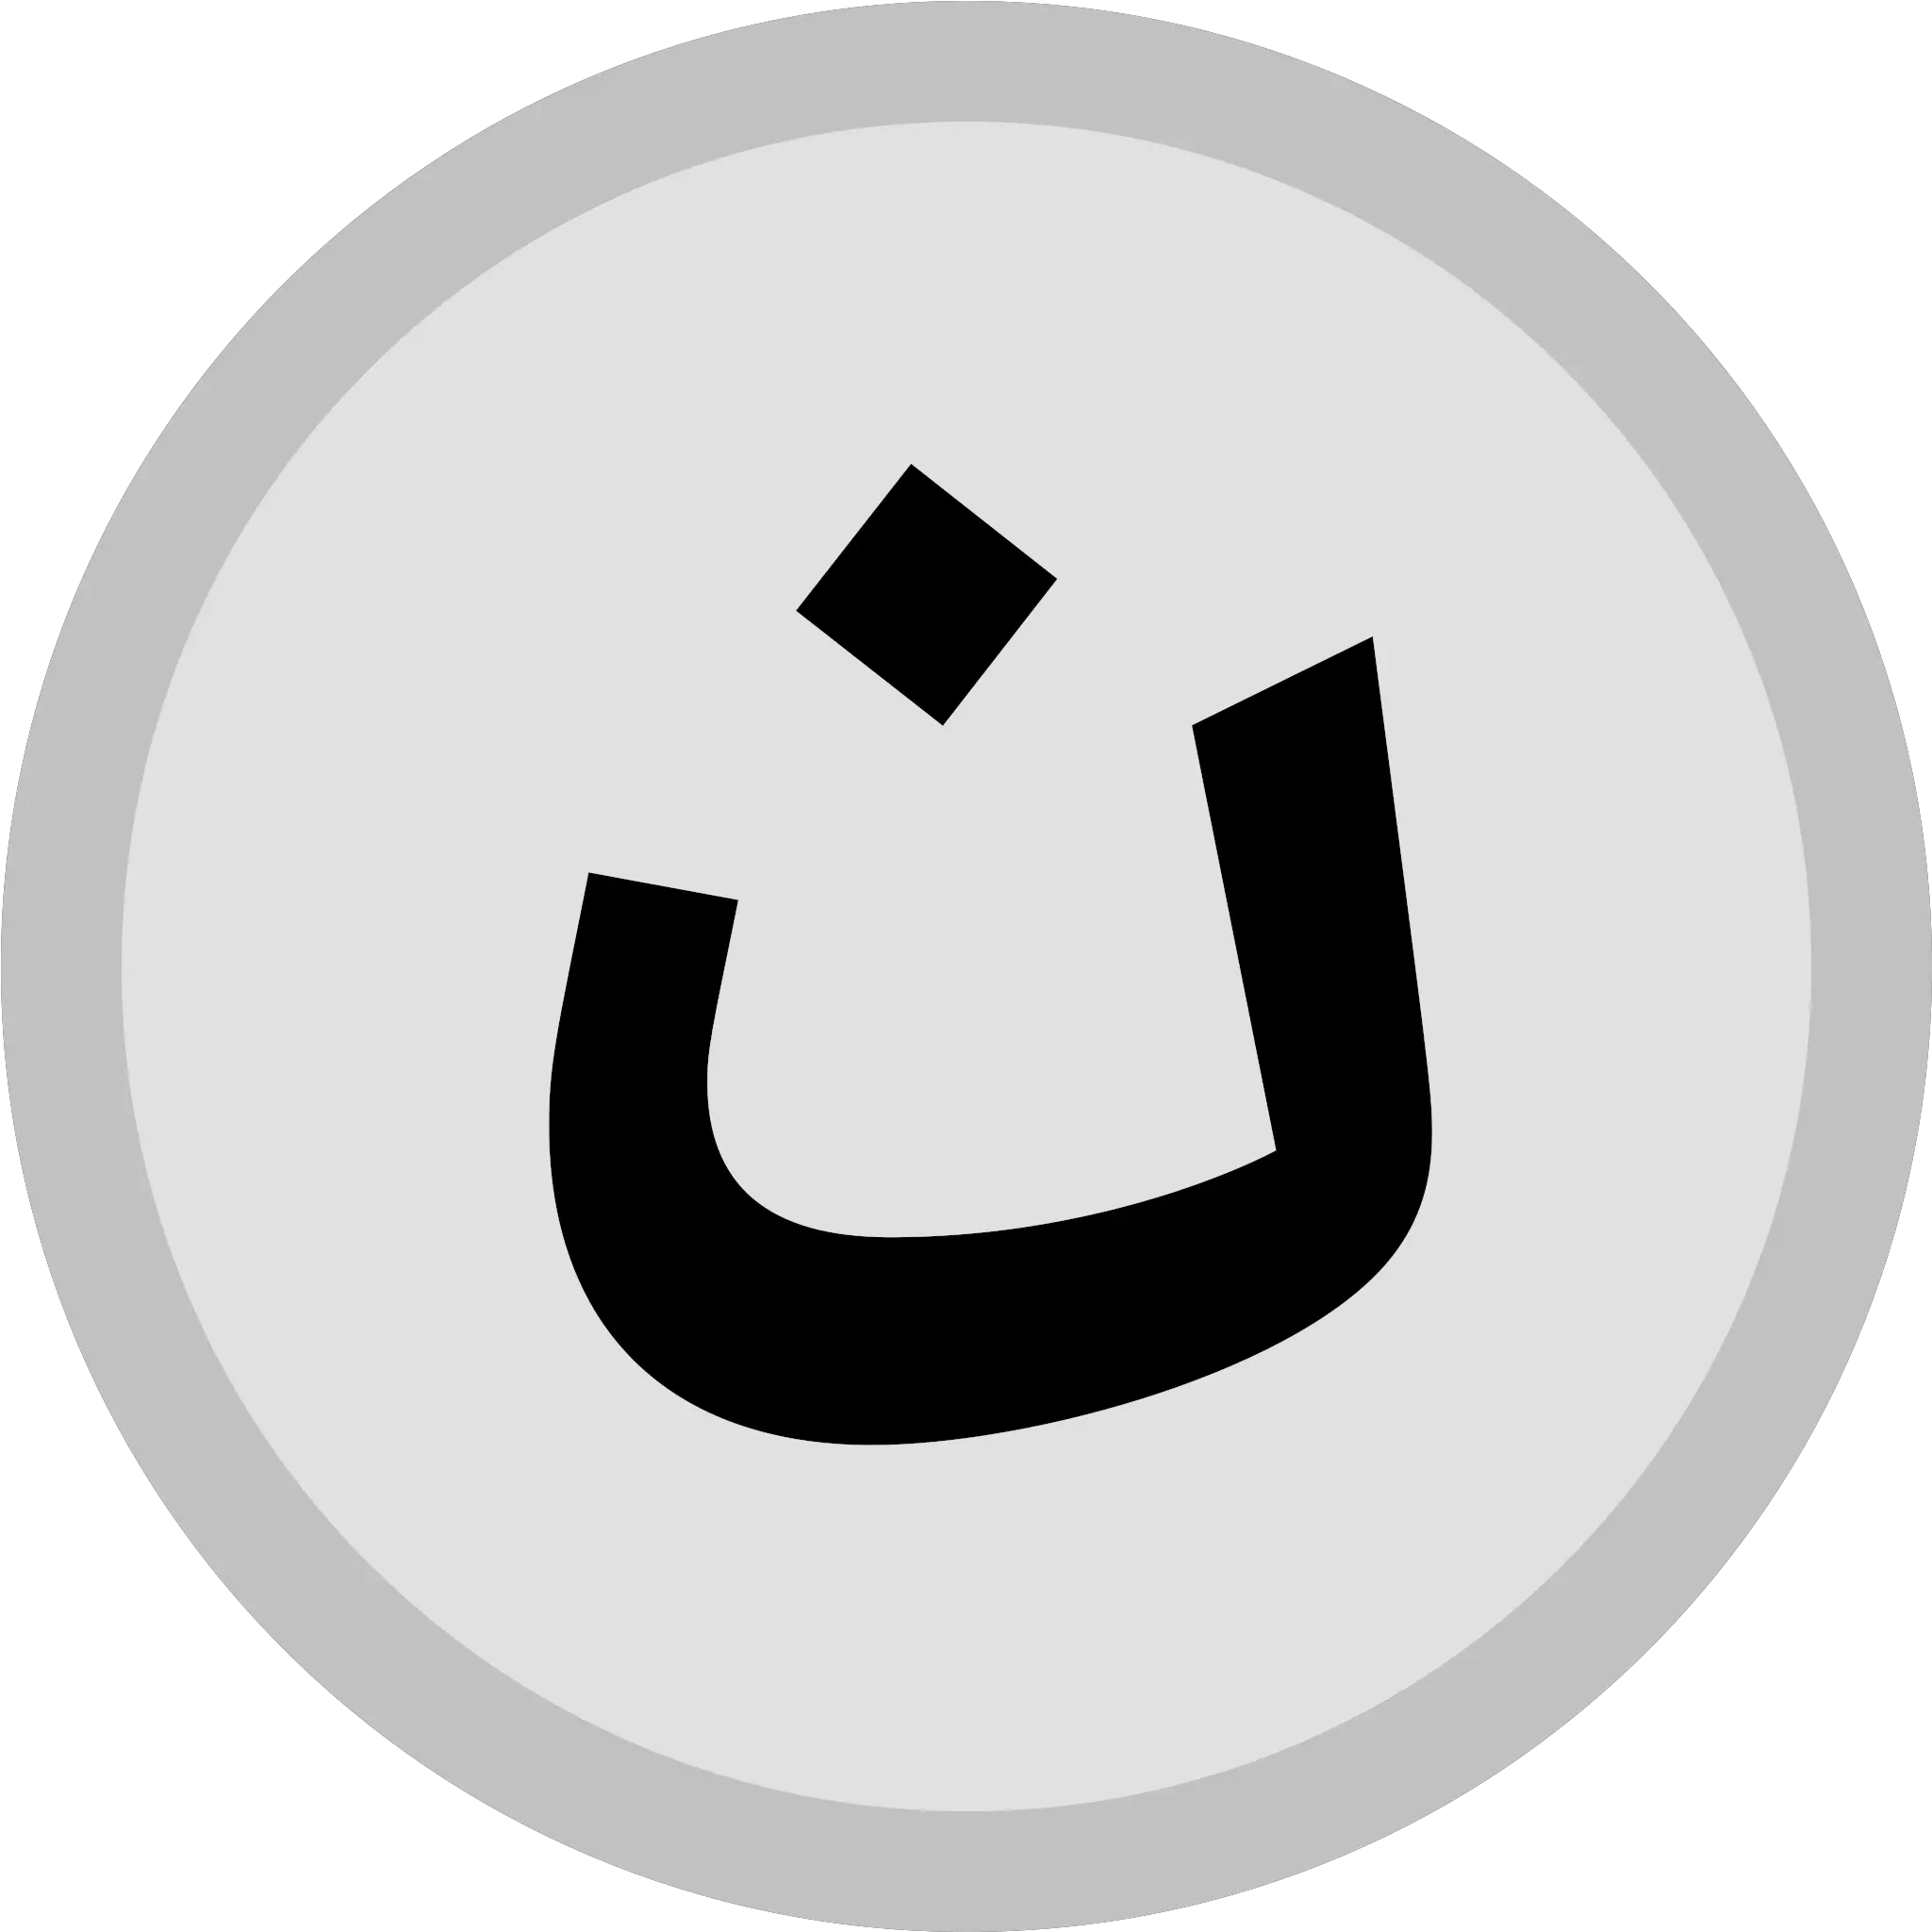 Filesilver Medal Icon Nun Initial Fasvg Wikimedia Commons Dot Png Initial Icon